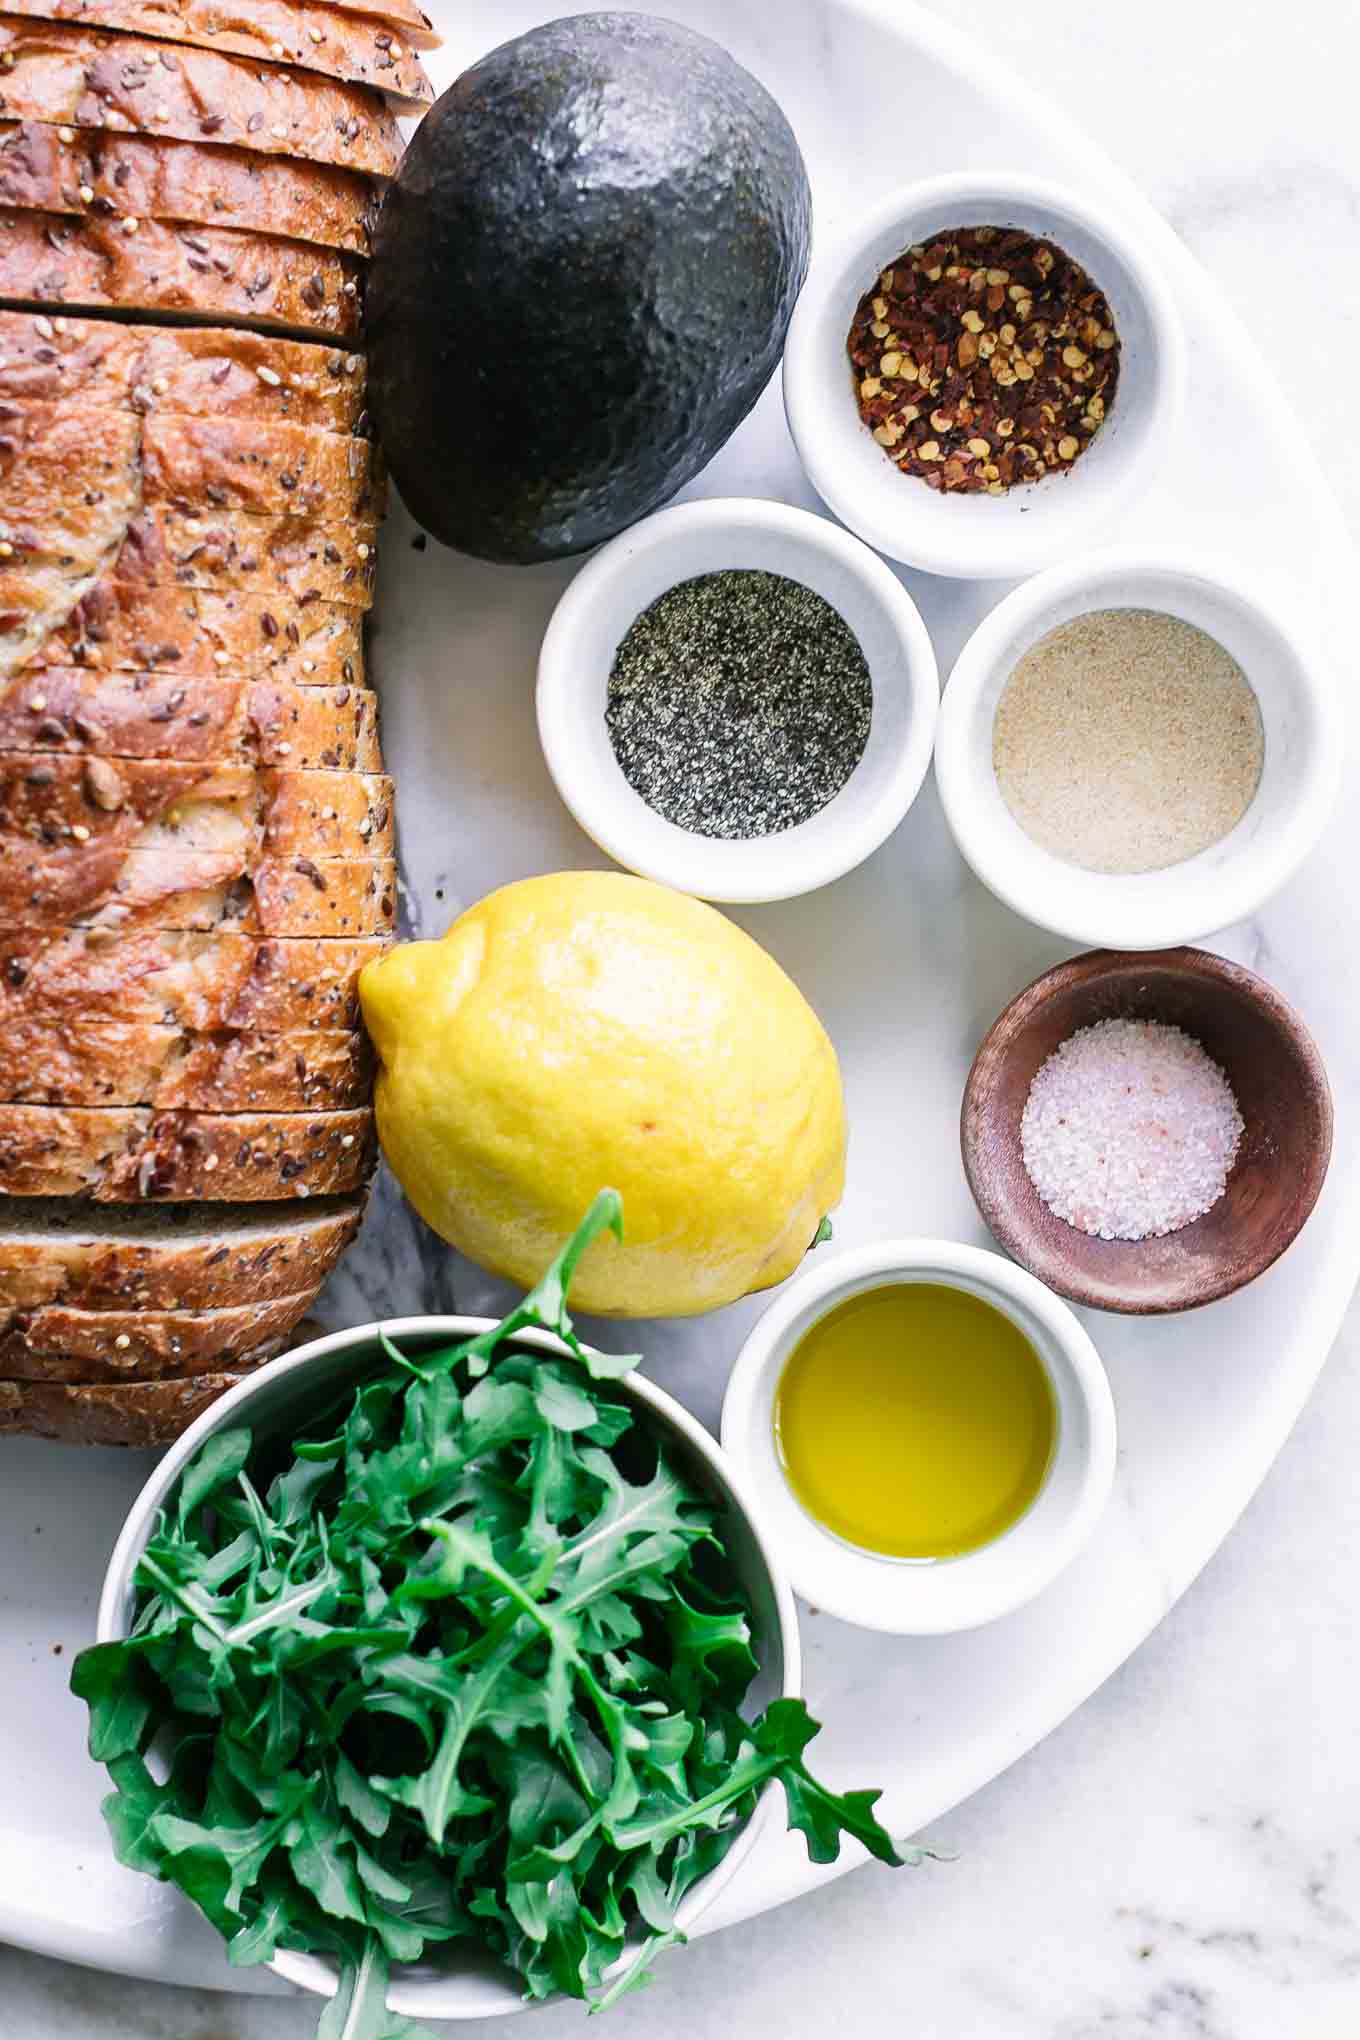 whole wheat bread, an avocado, a lemon, and bowls of arugula, oil, and seasonings on a white table for avocado toast